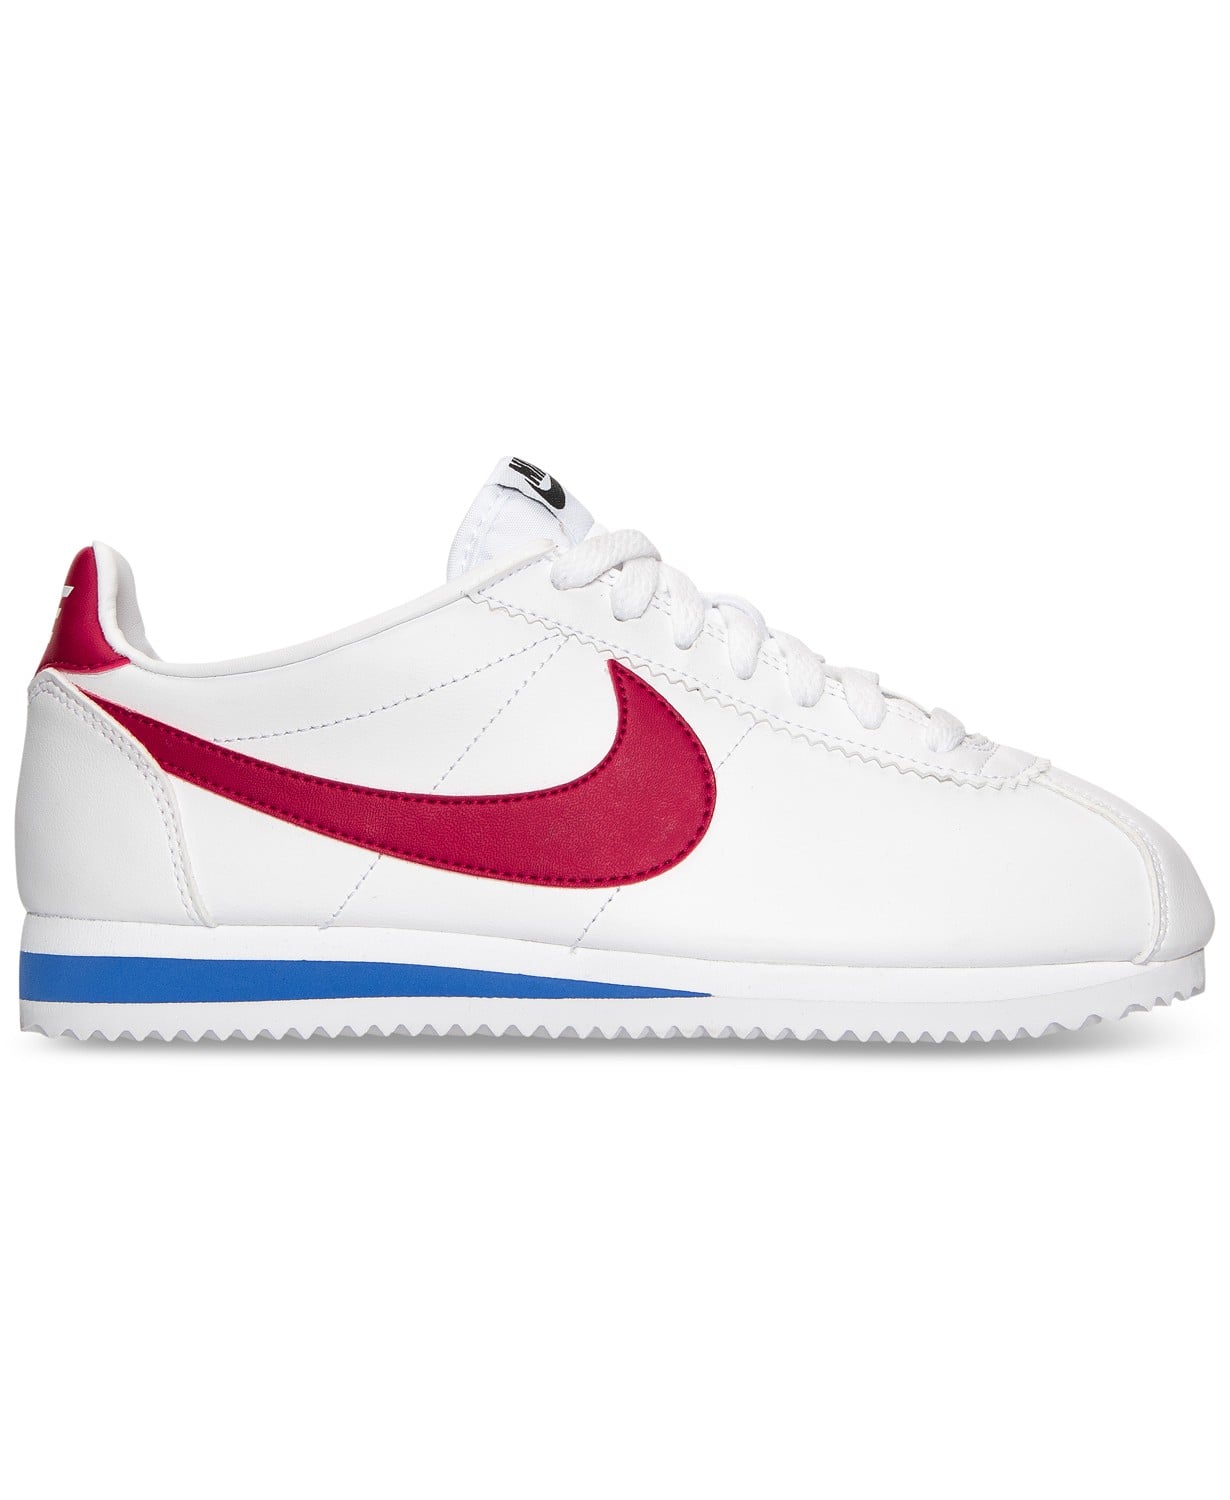 Nike Classic Cortez Leather Sneakers | Macy's Has 7,000+ but We Recommend These 31 For Fall POPSUGAR Fashion Photo 19